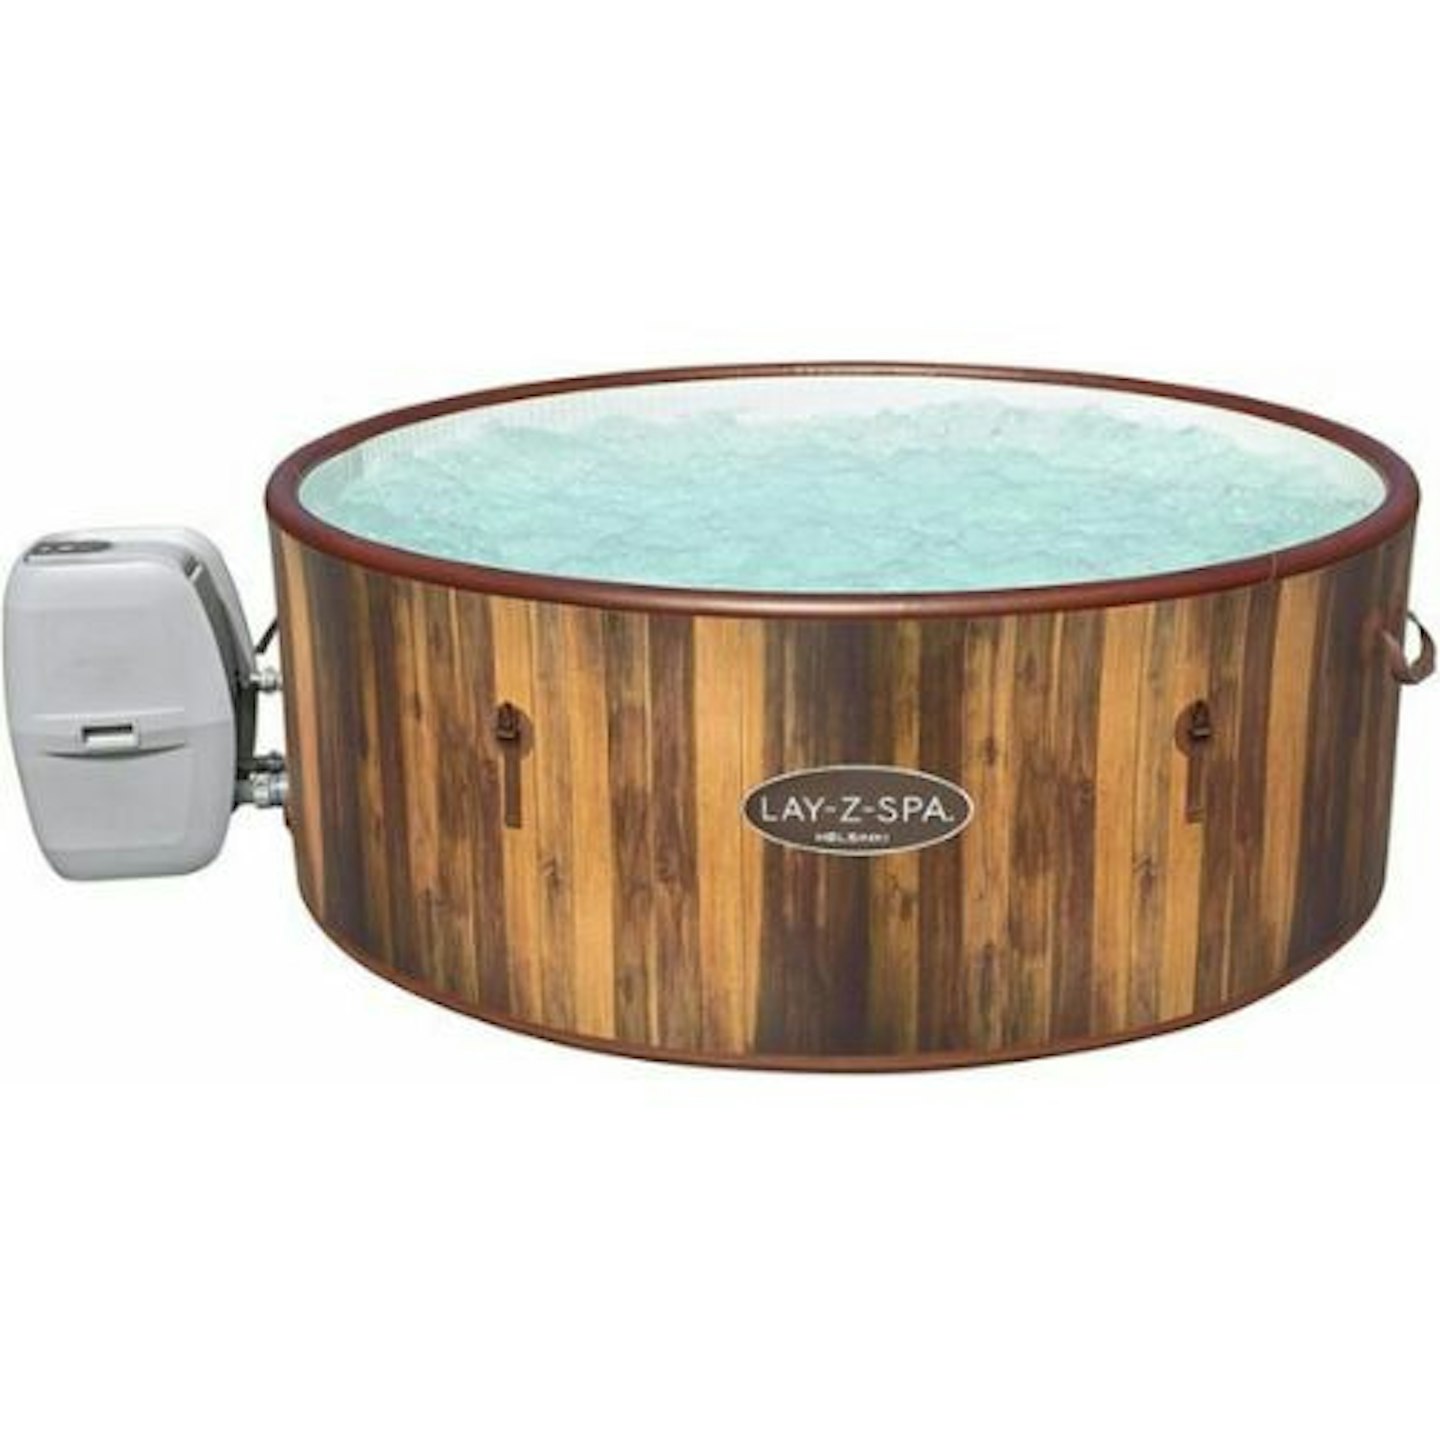 Lay-Z-Spa Airjet Inflatable Hot Tub (5-7 Person) 